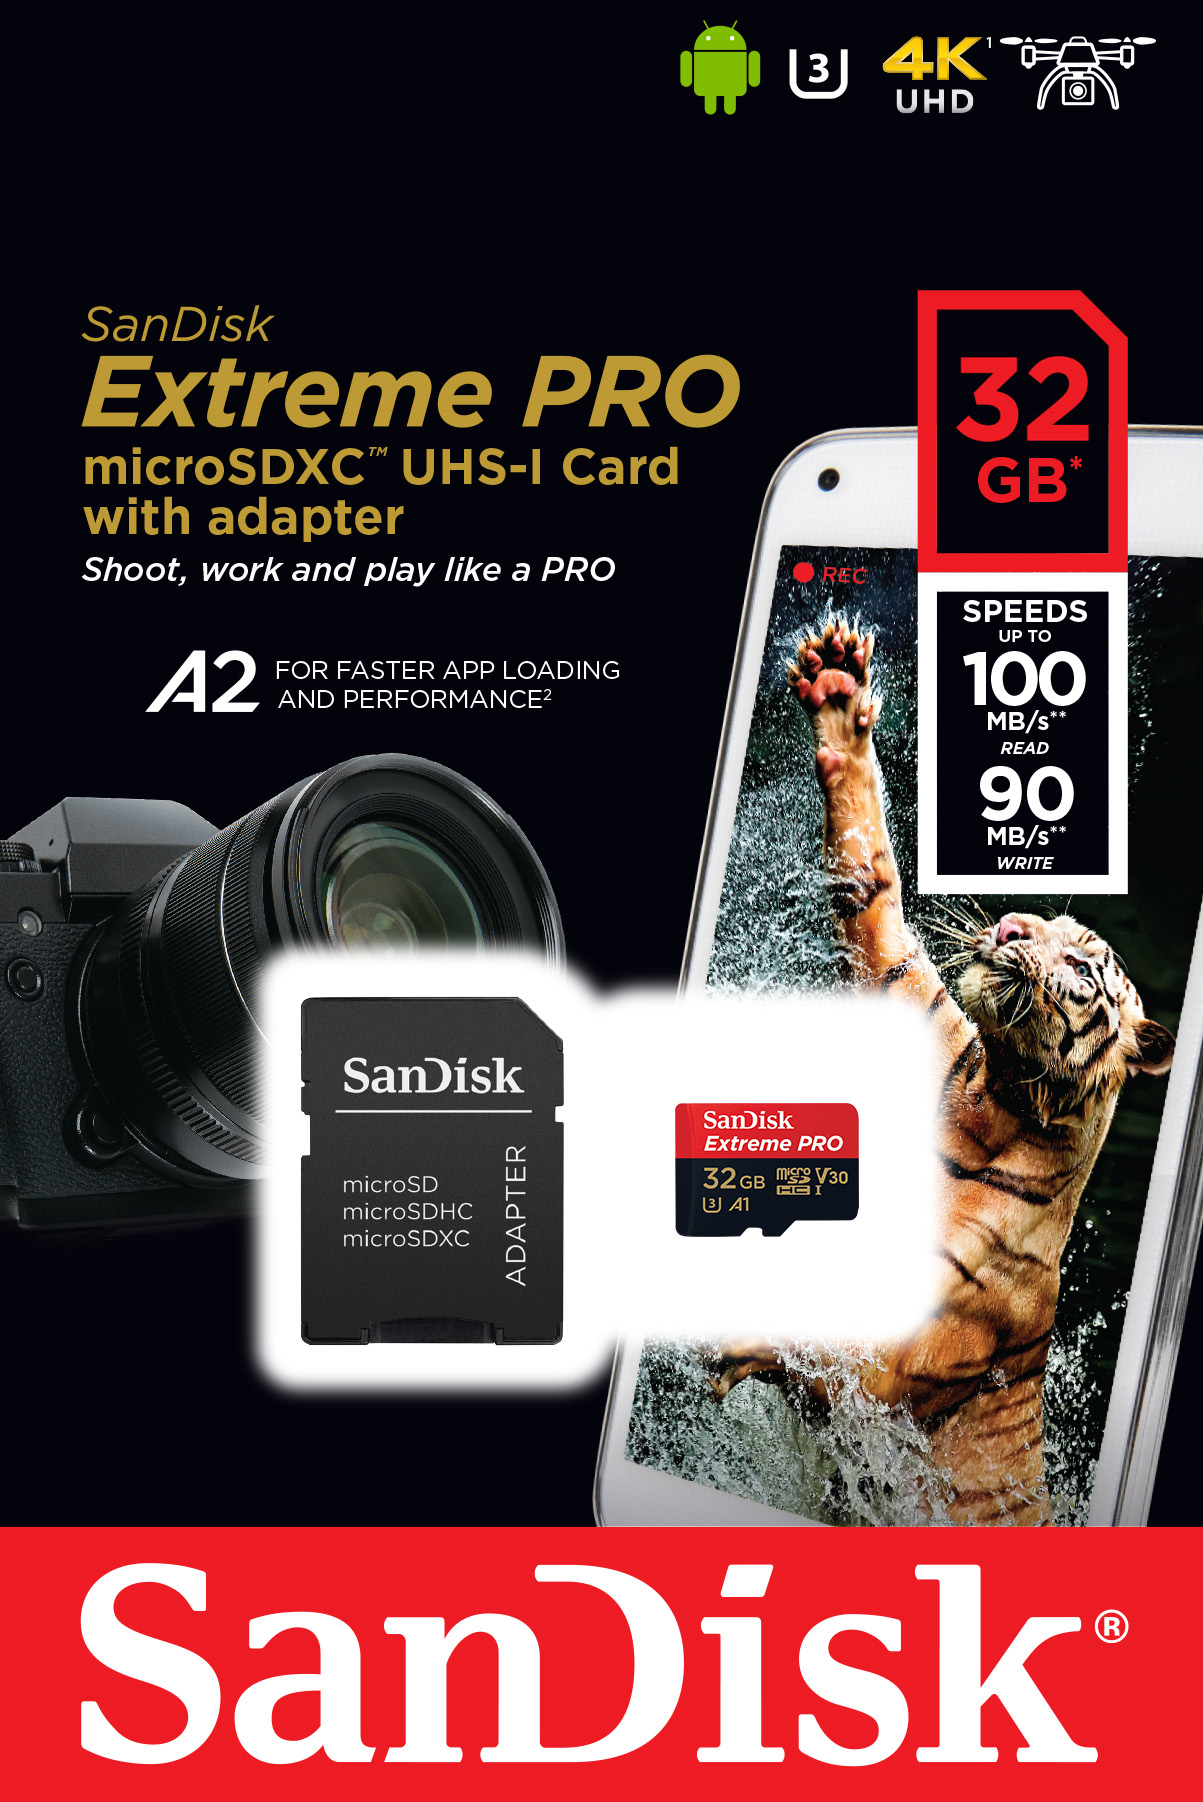 Sandisk microSDXC Card 32GB, Extreme PRO, U3, A1, 4K UHD (R) 100MB/s, (W) 90MB/s, SD Adapter, Retail-Blister